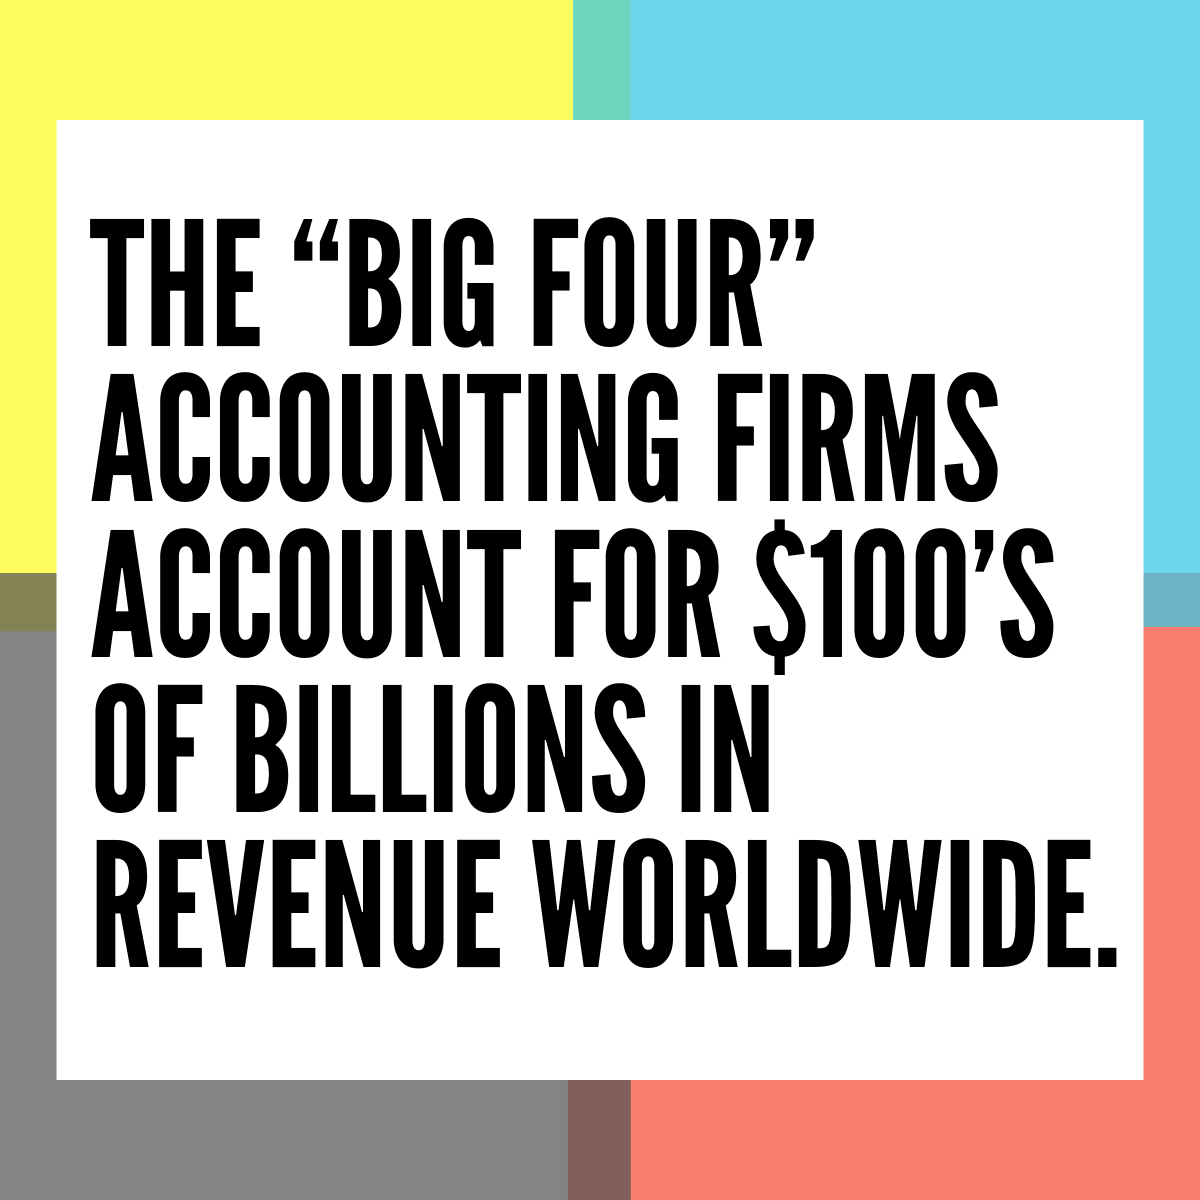 The "Big Four" accounting firms account for $100's of billions in revenue worldwide.